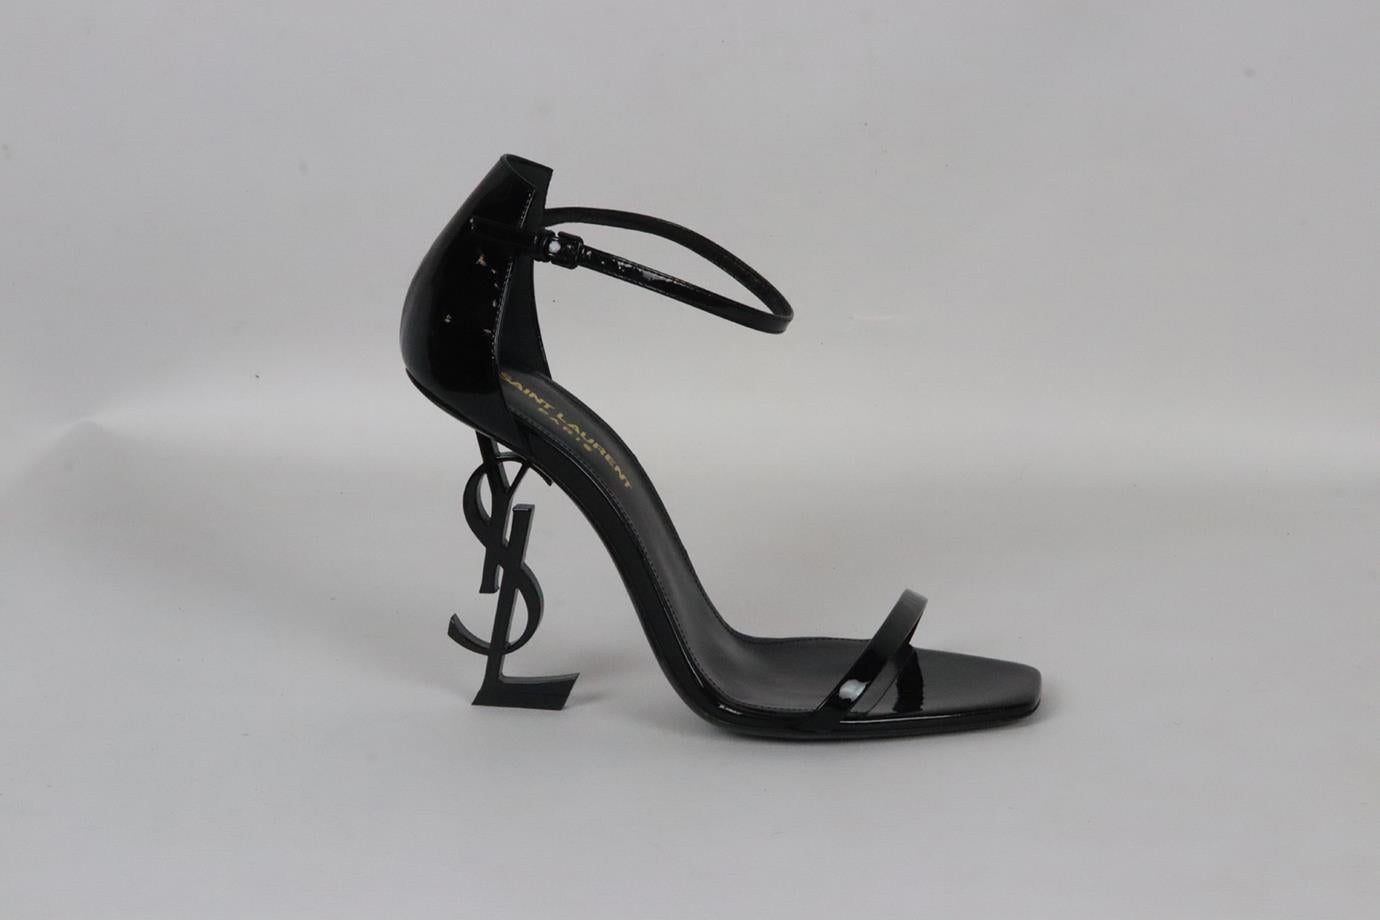 Saint Laurent Opyum patent leather sandals. Black. Buckle fastening at side. Does not come with dustbag or box. Size: EU 38 (UK 5, US 8). Insole: 9.4 in. Heel Height: 3.8 in. Platform: 0.2 in. Very good condition - Worn once. Light wear to soles;